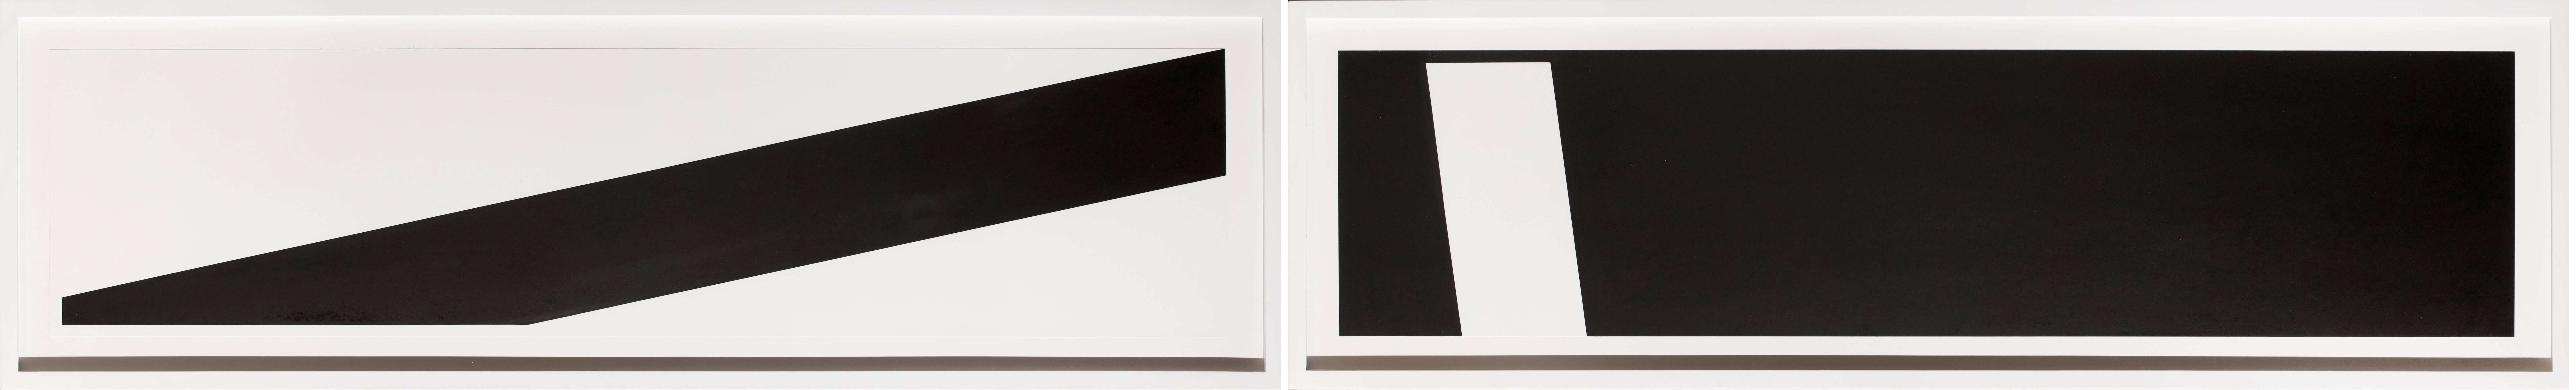 Untitled G (diptych) 